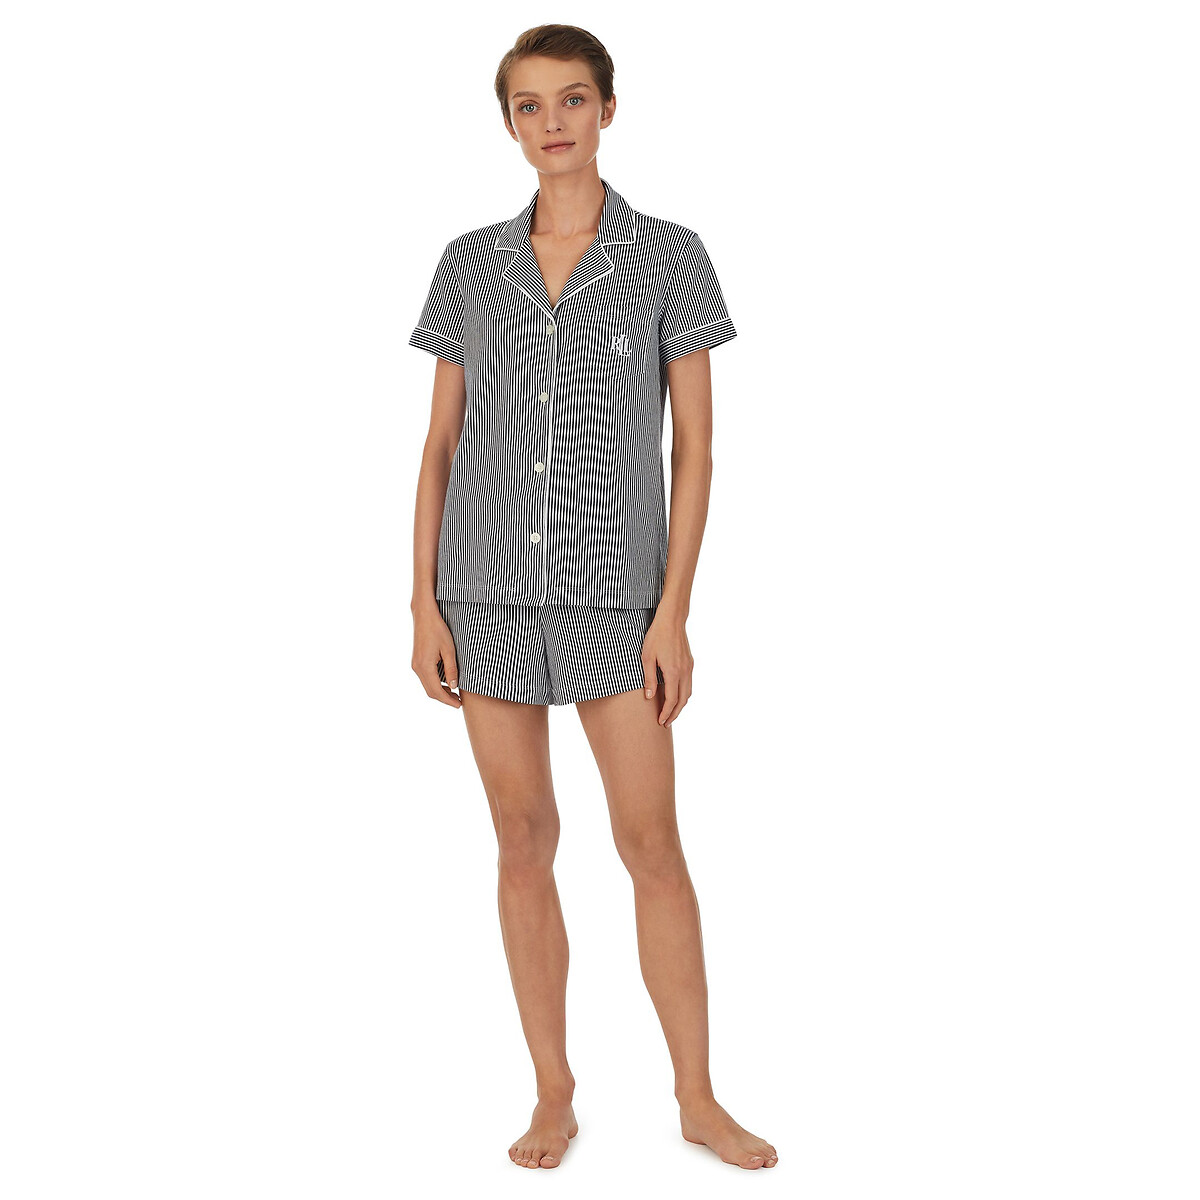 Image of Striped Cotton Short Pyjamas with Short Sleeves